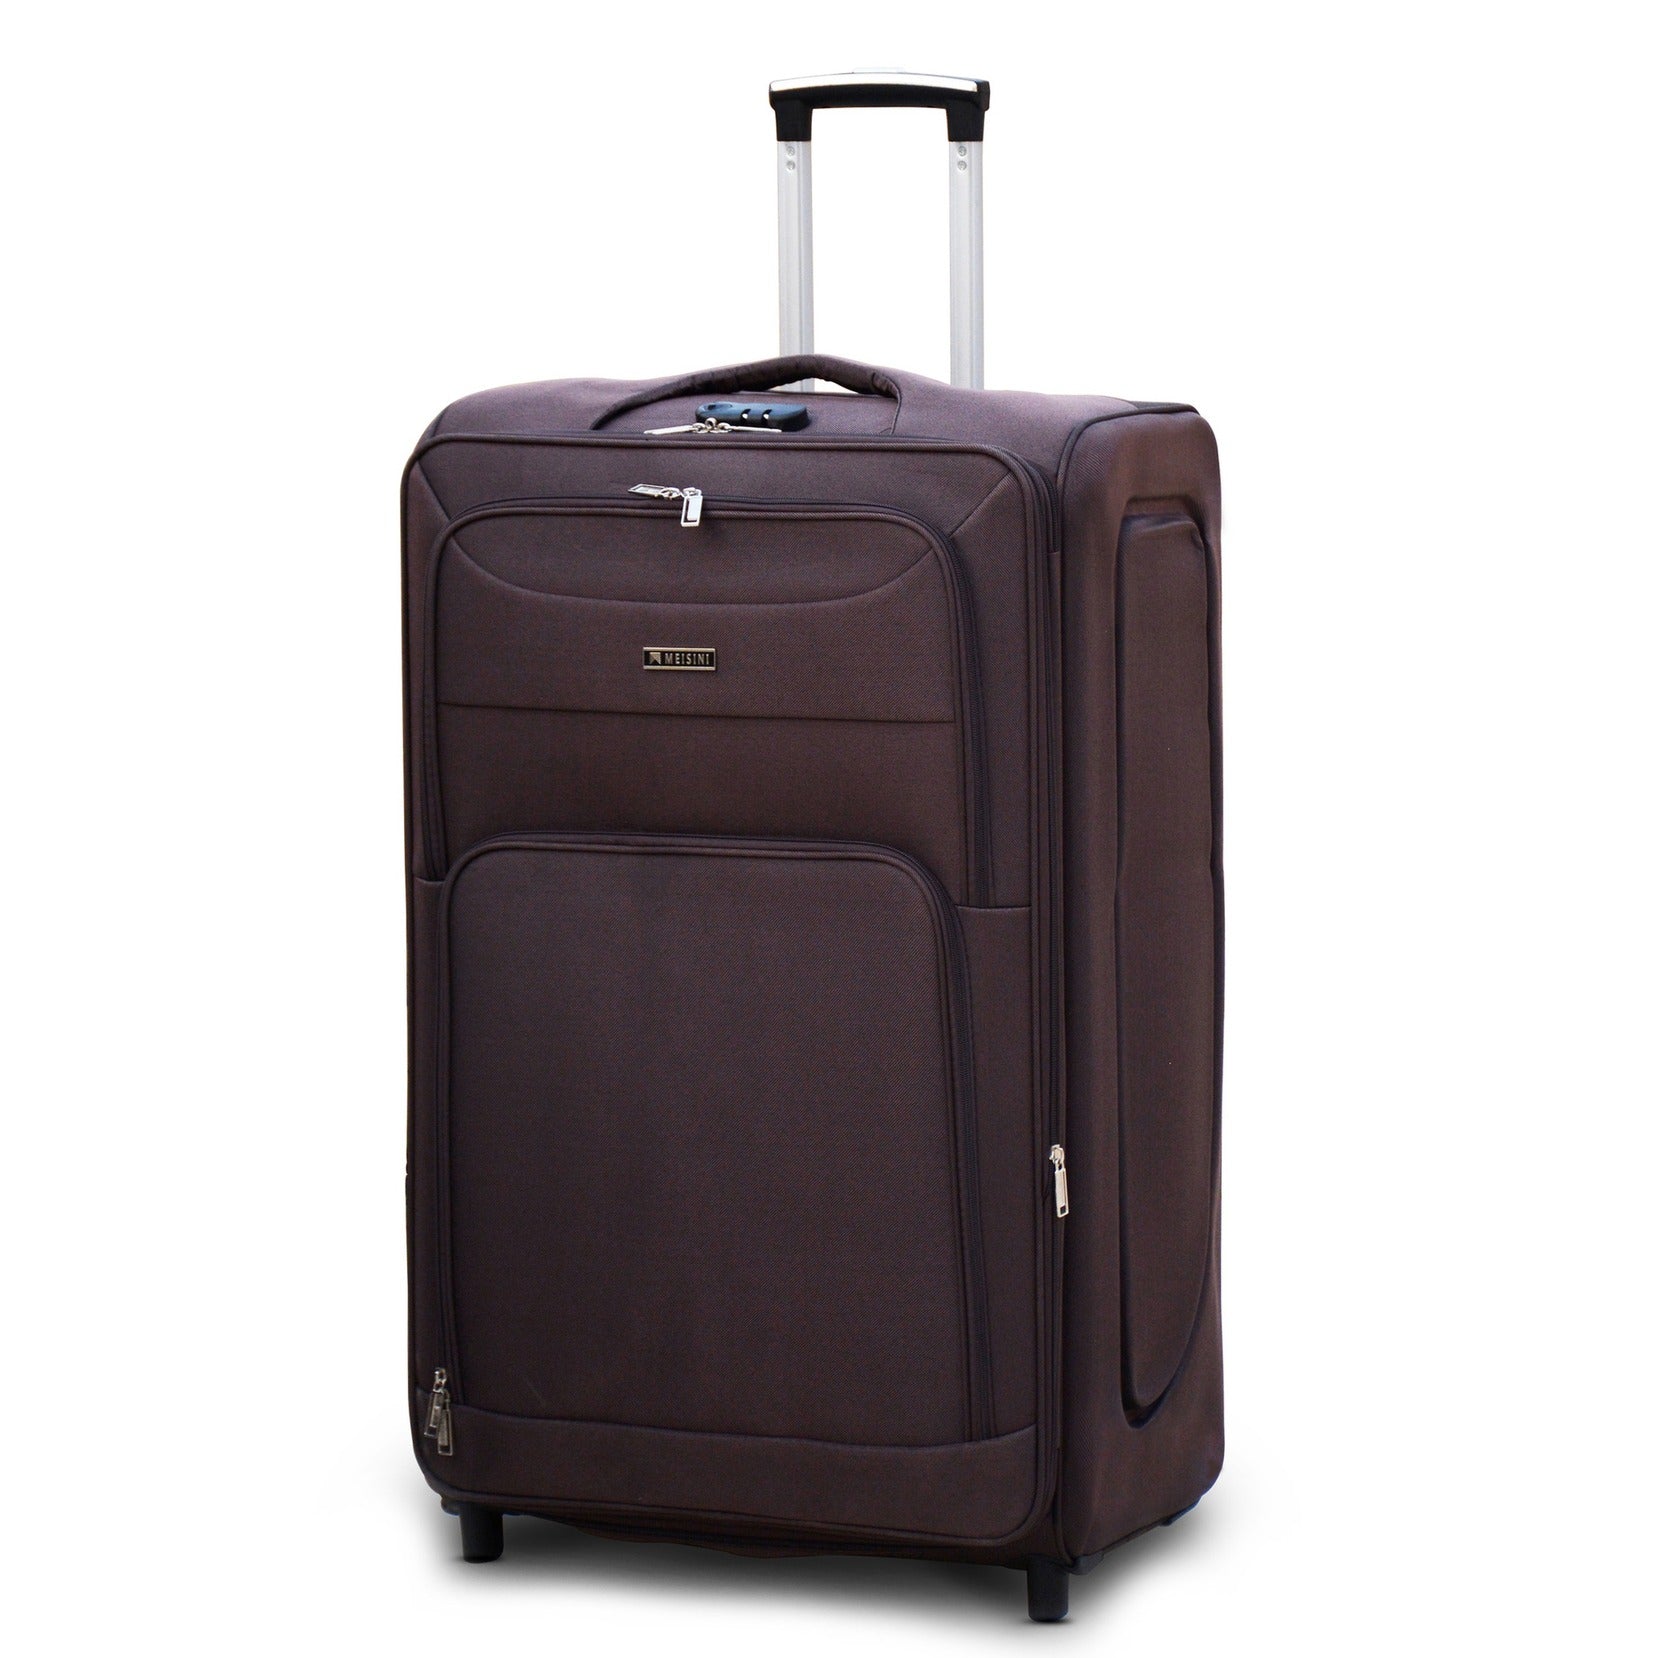 32" Coffee Colour LP 2 Wheel 0161 Luggage Lightweight Soft Material Trolley Bag